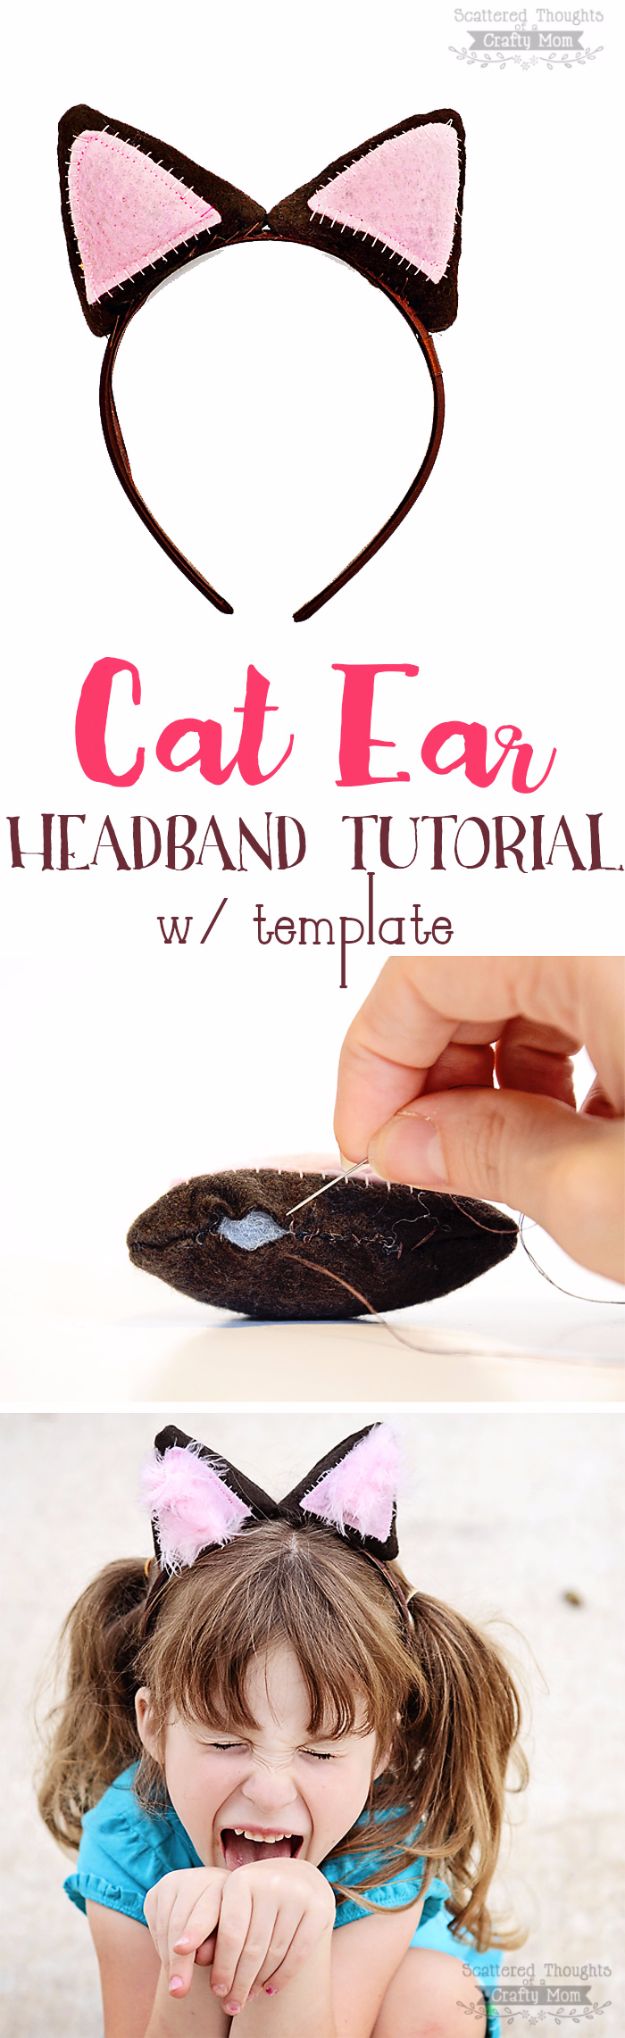 DIY Ideas With Cats - DIY Cat Ear Headband - Cute and Easy DIY Projects for Cat Lovers - Wall and Home Decor Projects, Things To Make and Sell on Etsy - Quick Gifts to Make for Friends Who Have Kittens and Kitties - Homemade No Sew Projects- Fun Jewelry, Cool Clothes, Pillows and Kitty Accessories 